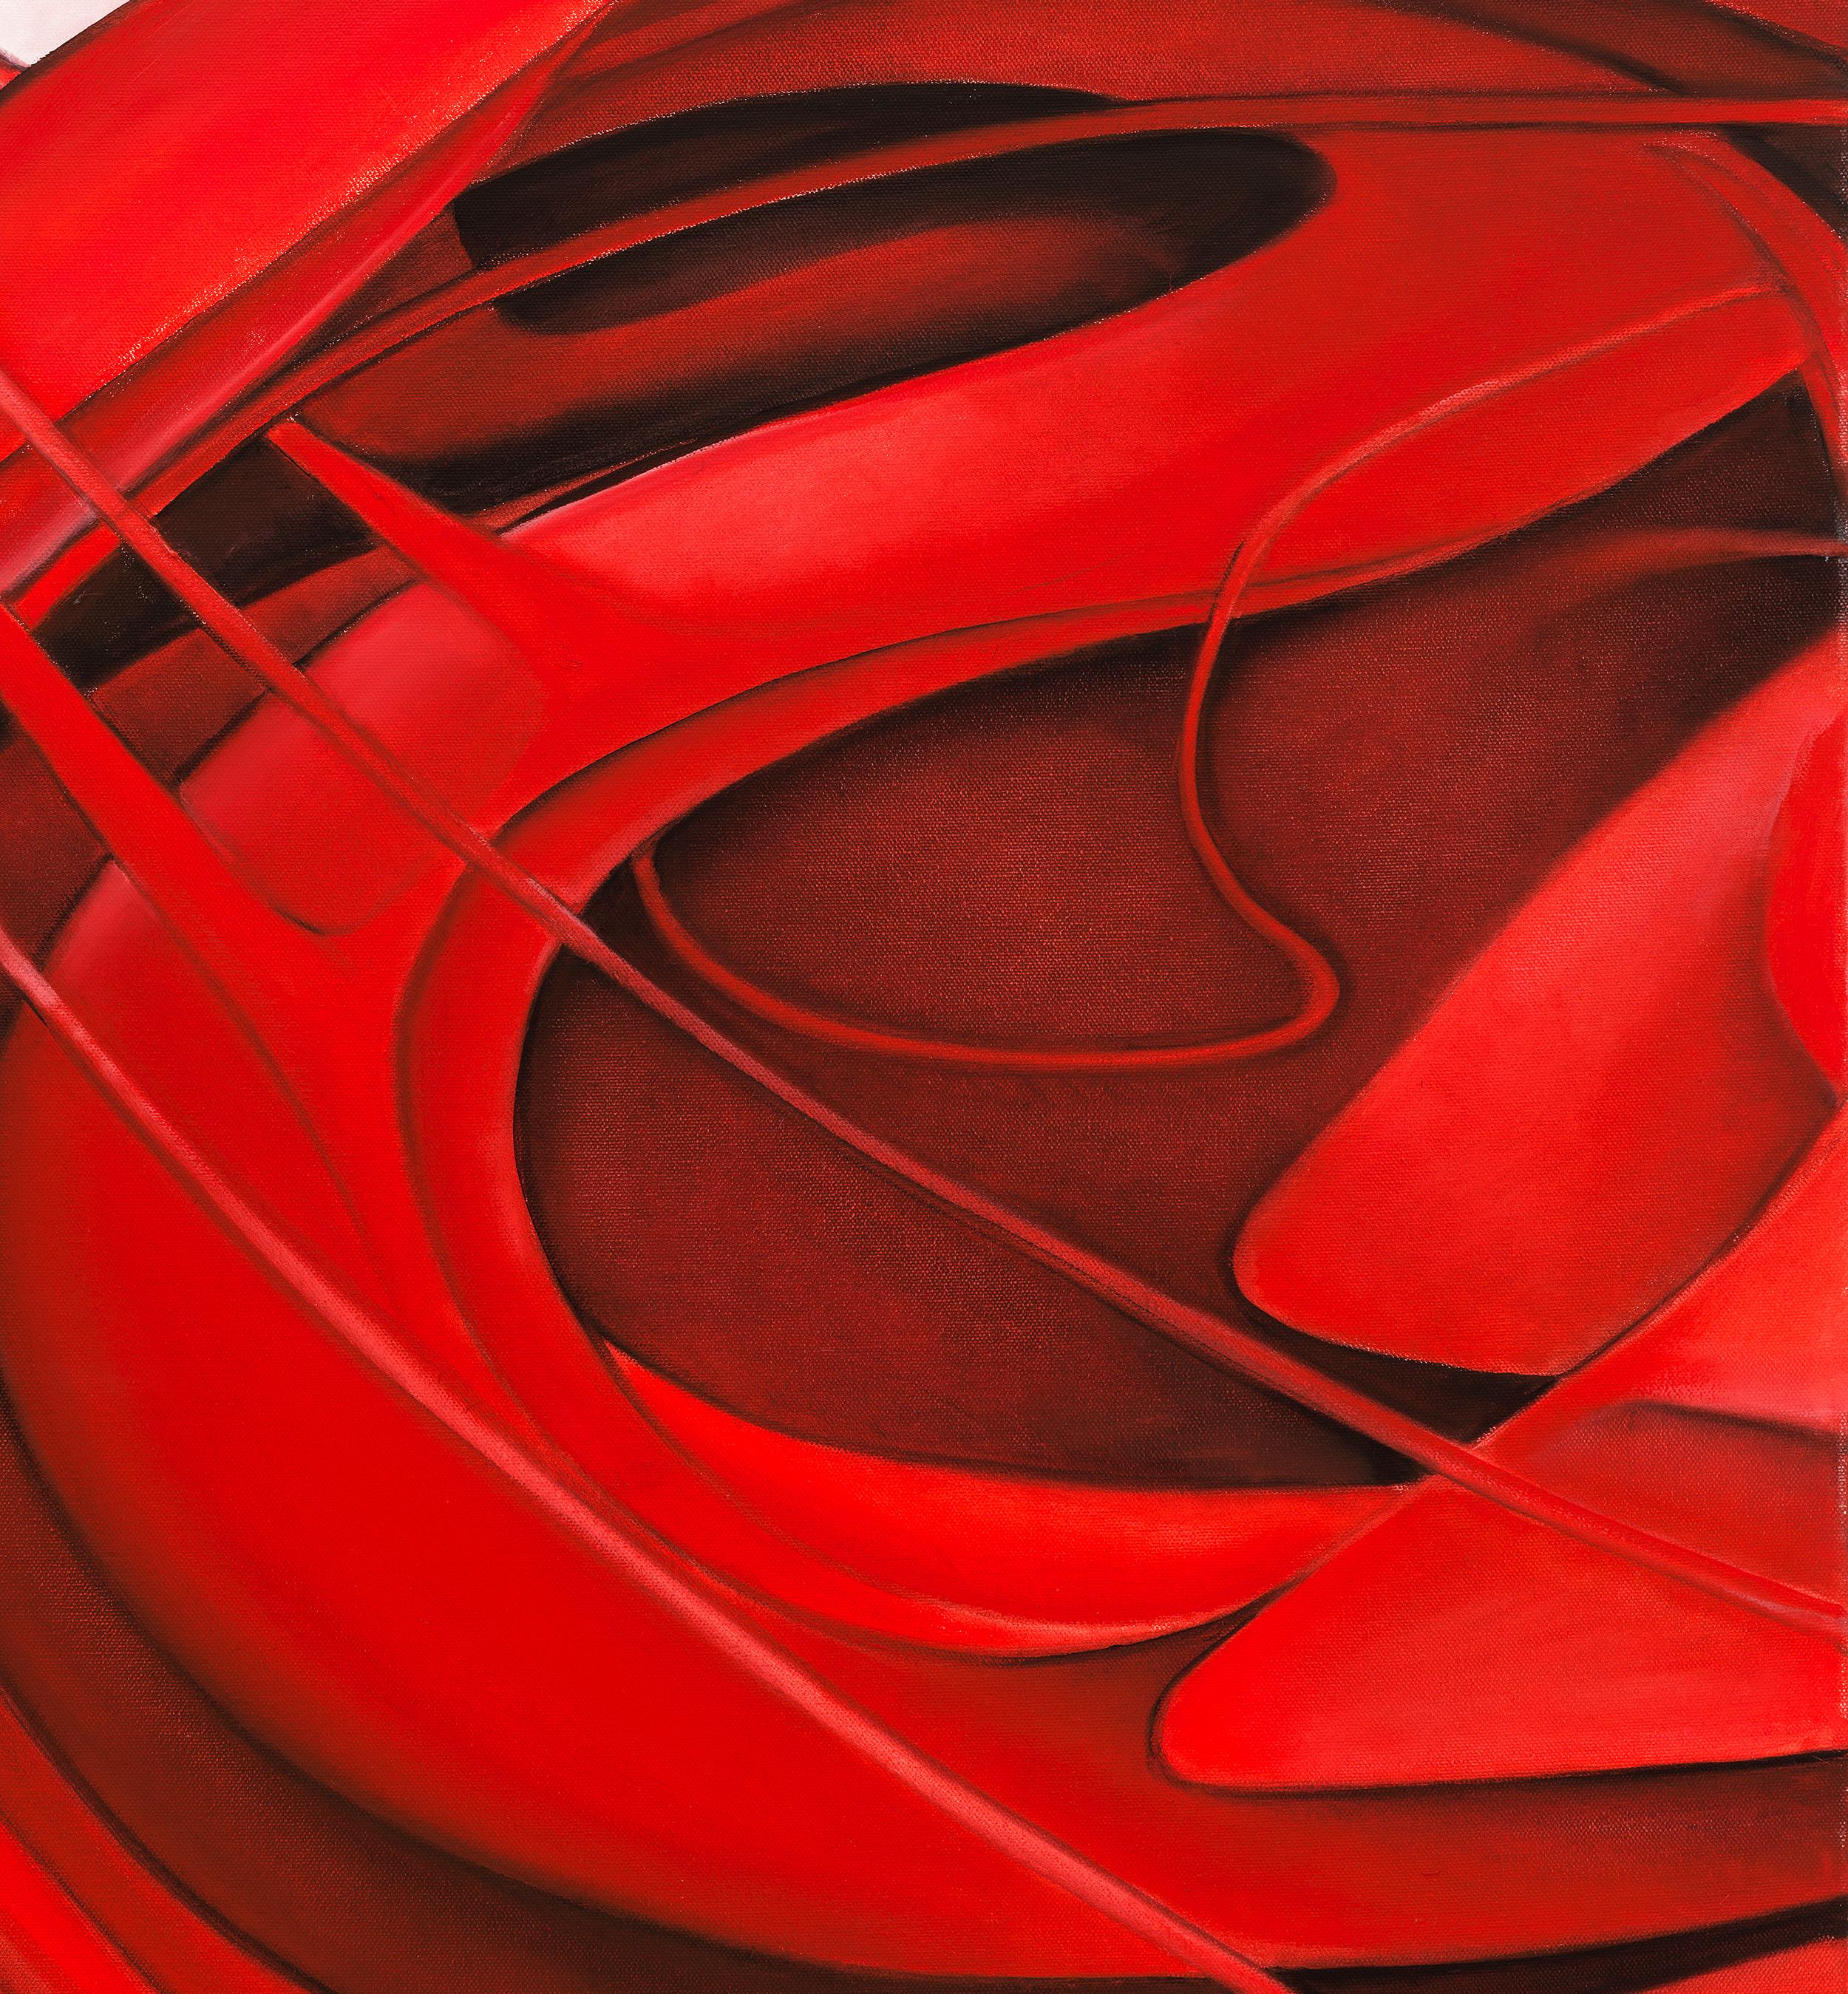 Chicago Fire - Original Oil, Abstract with Swirling Shades of Red and White - Painting by Richard Gibbons